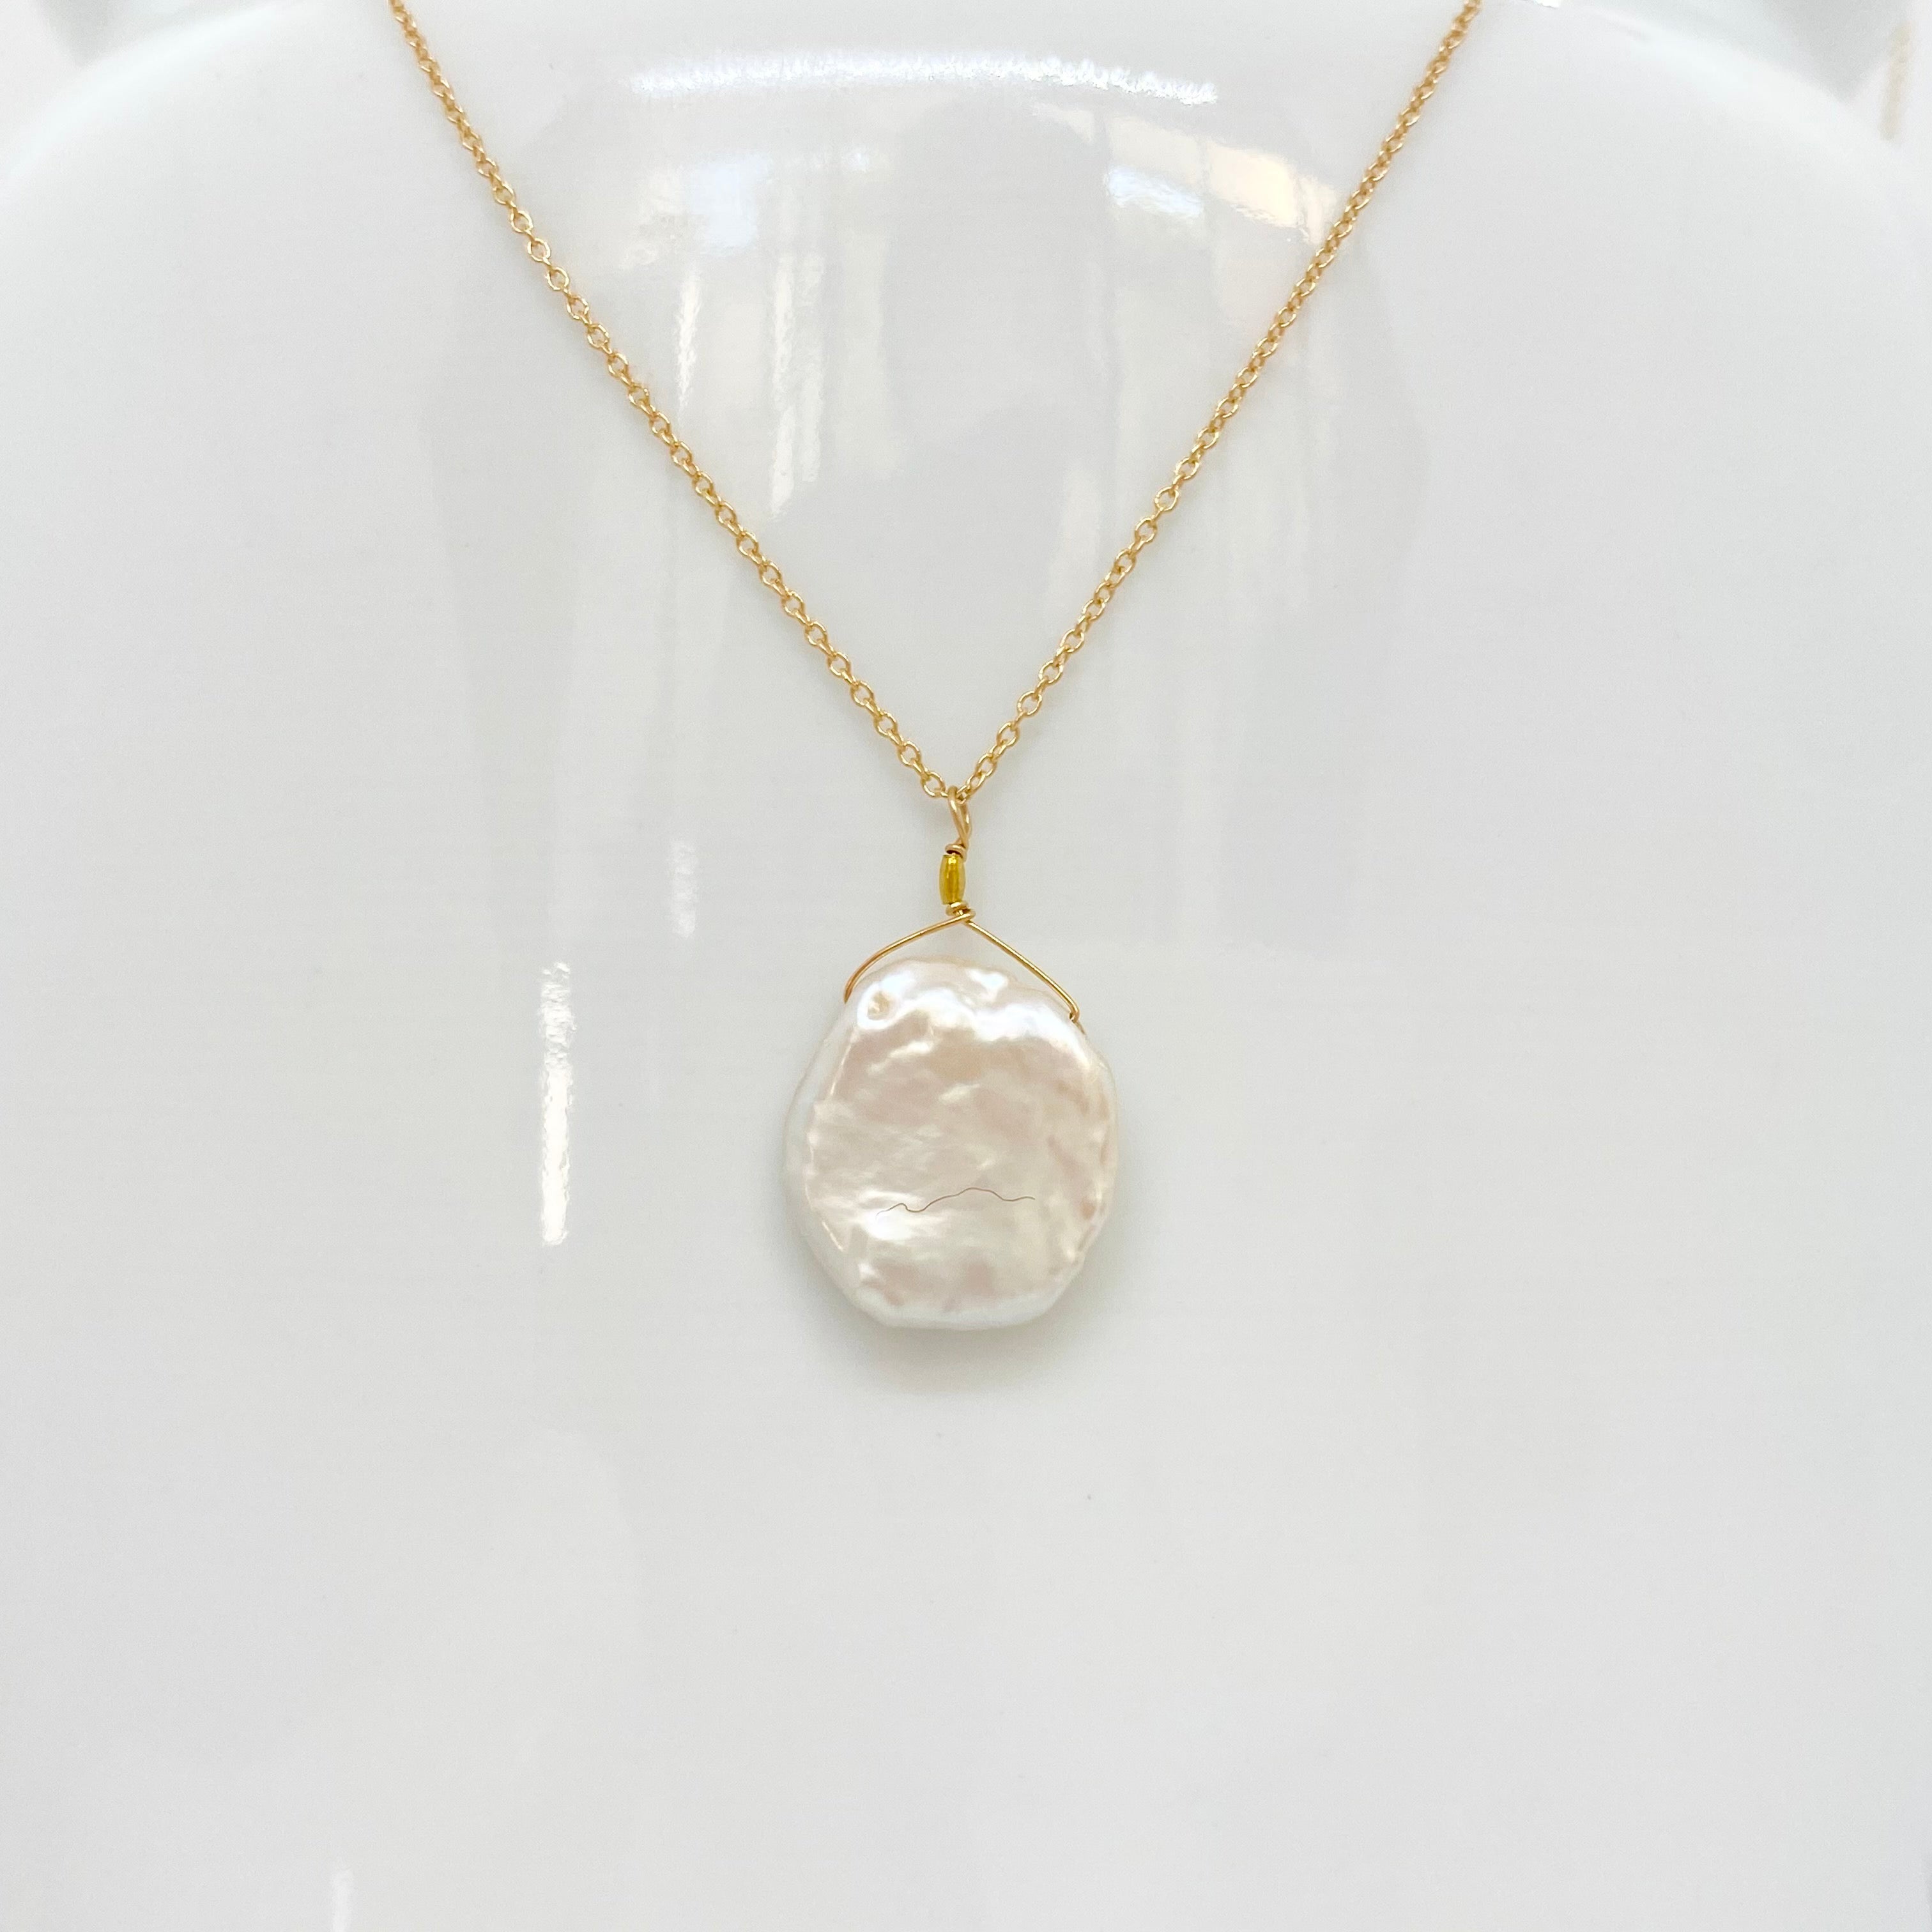 14k Gold Chain Necklace w/ Keshi Pearl & 18k Gold Nugget